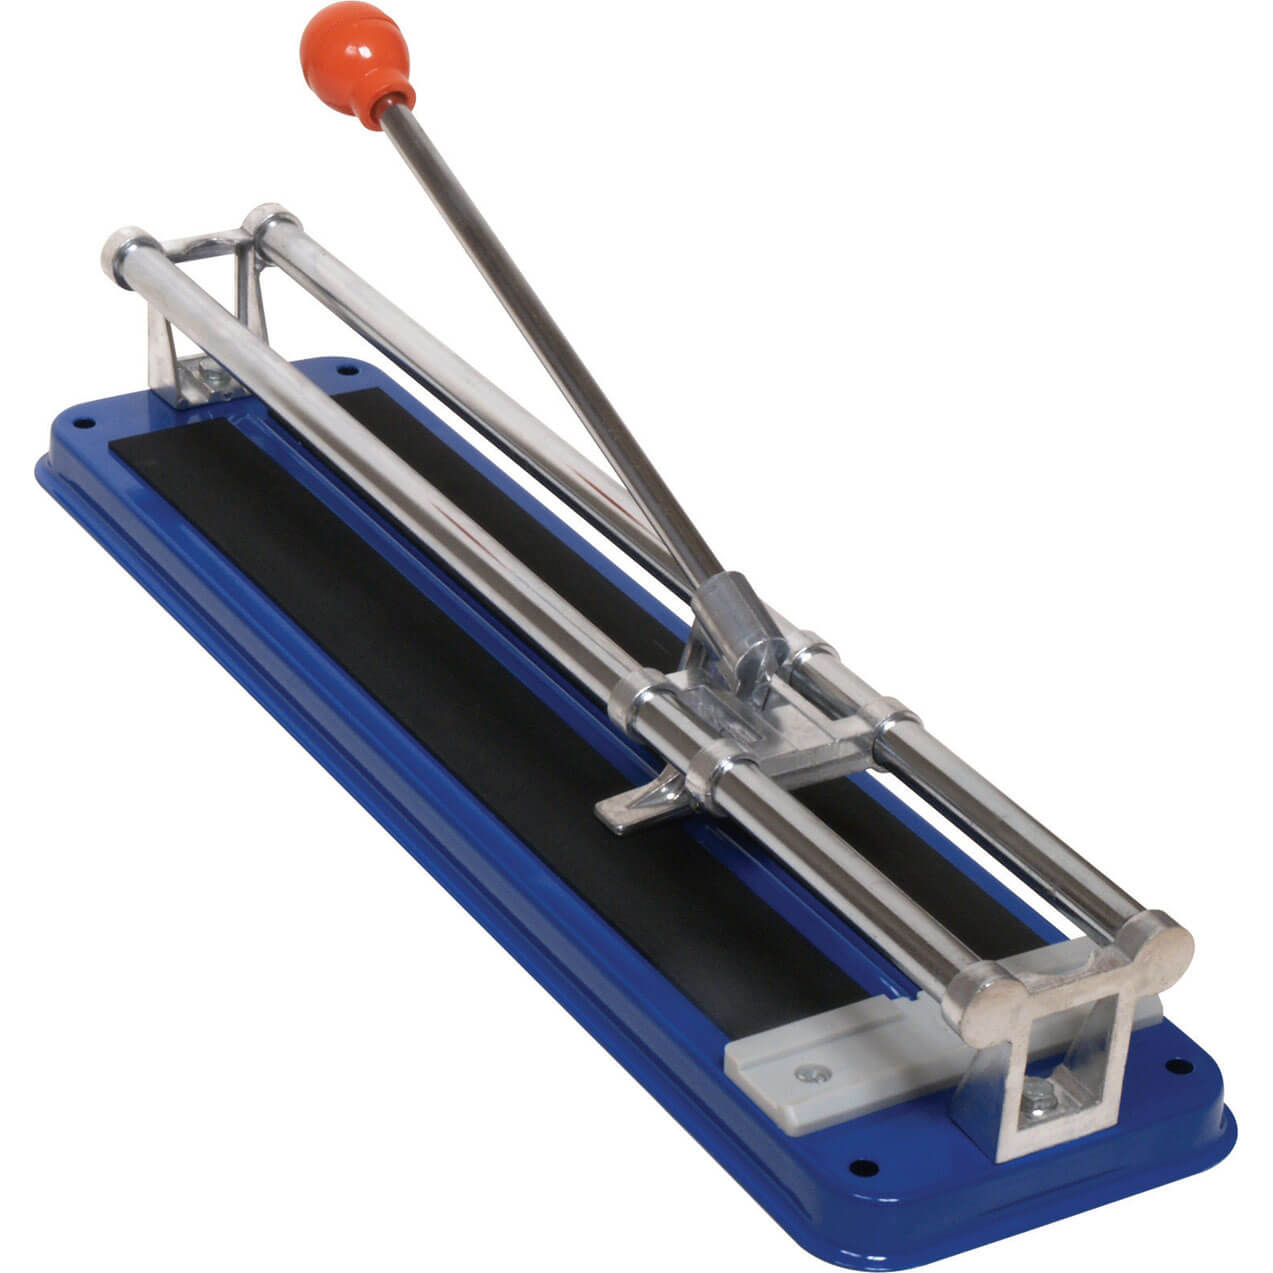 Photo of Vitrex Flat Bed Tile Cutter